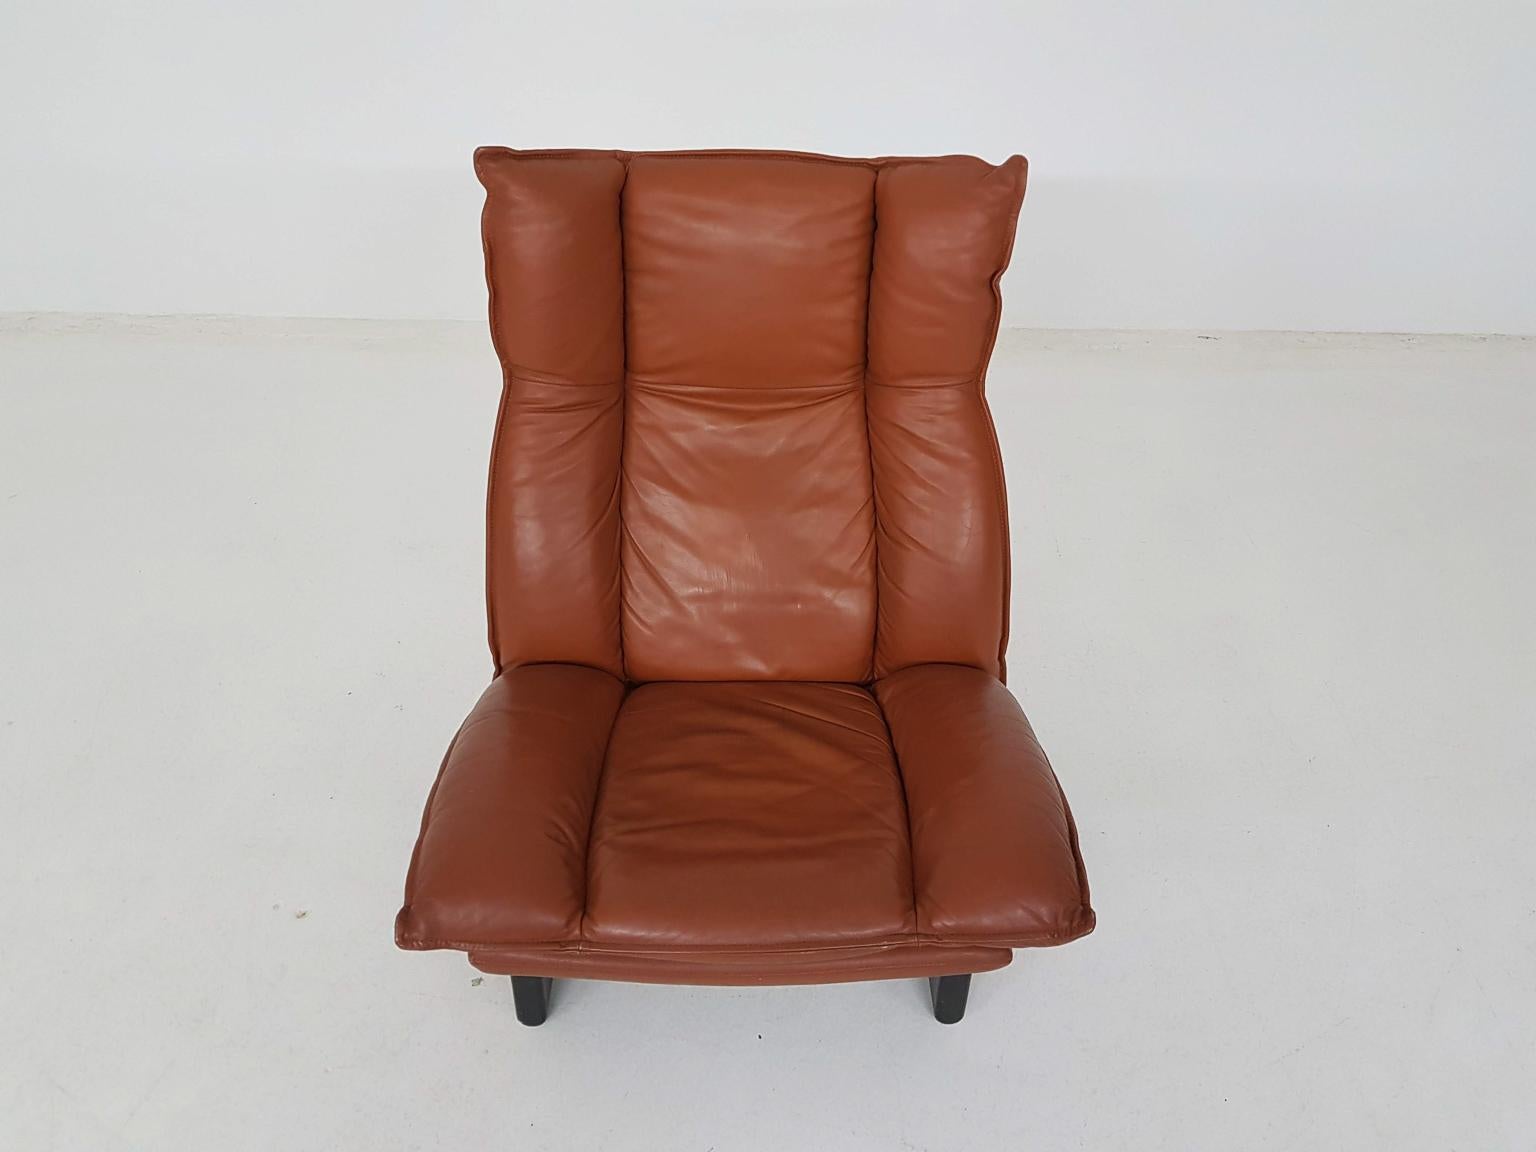 Leather and Wood Lounge Chair by Leolux, Dutch Modern Design, 1970s 3